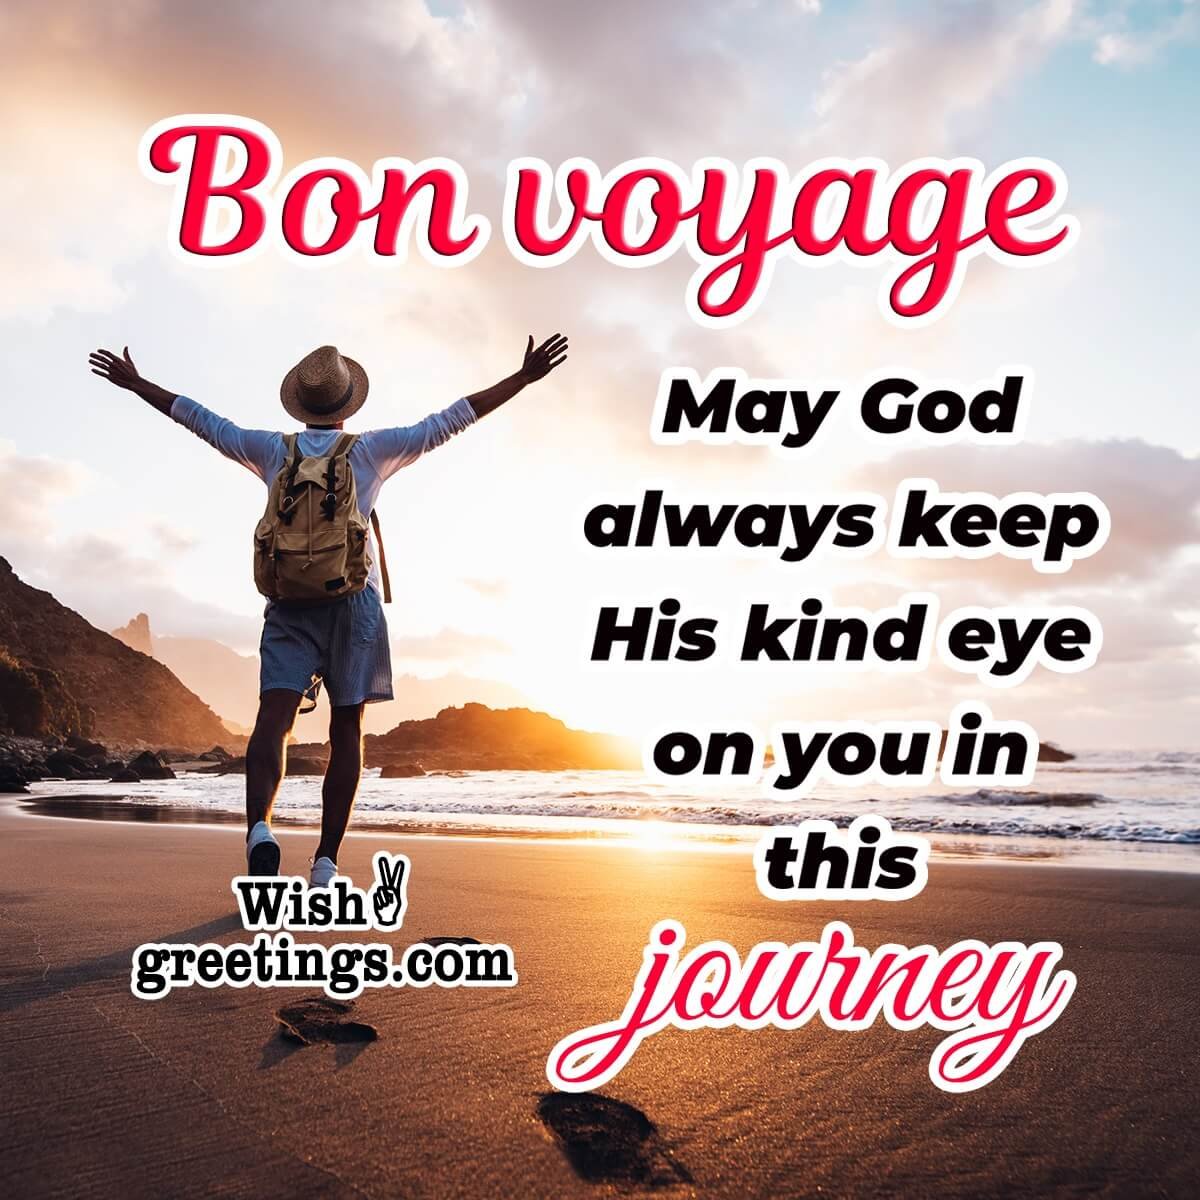 bon voyage meaning in te